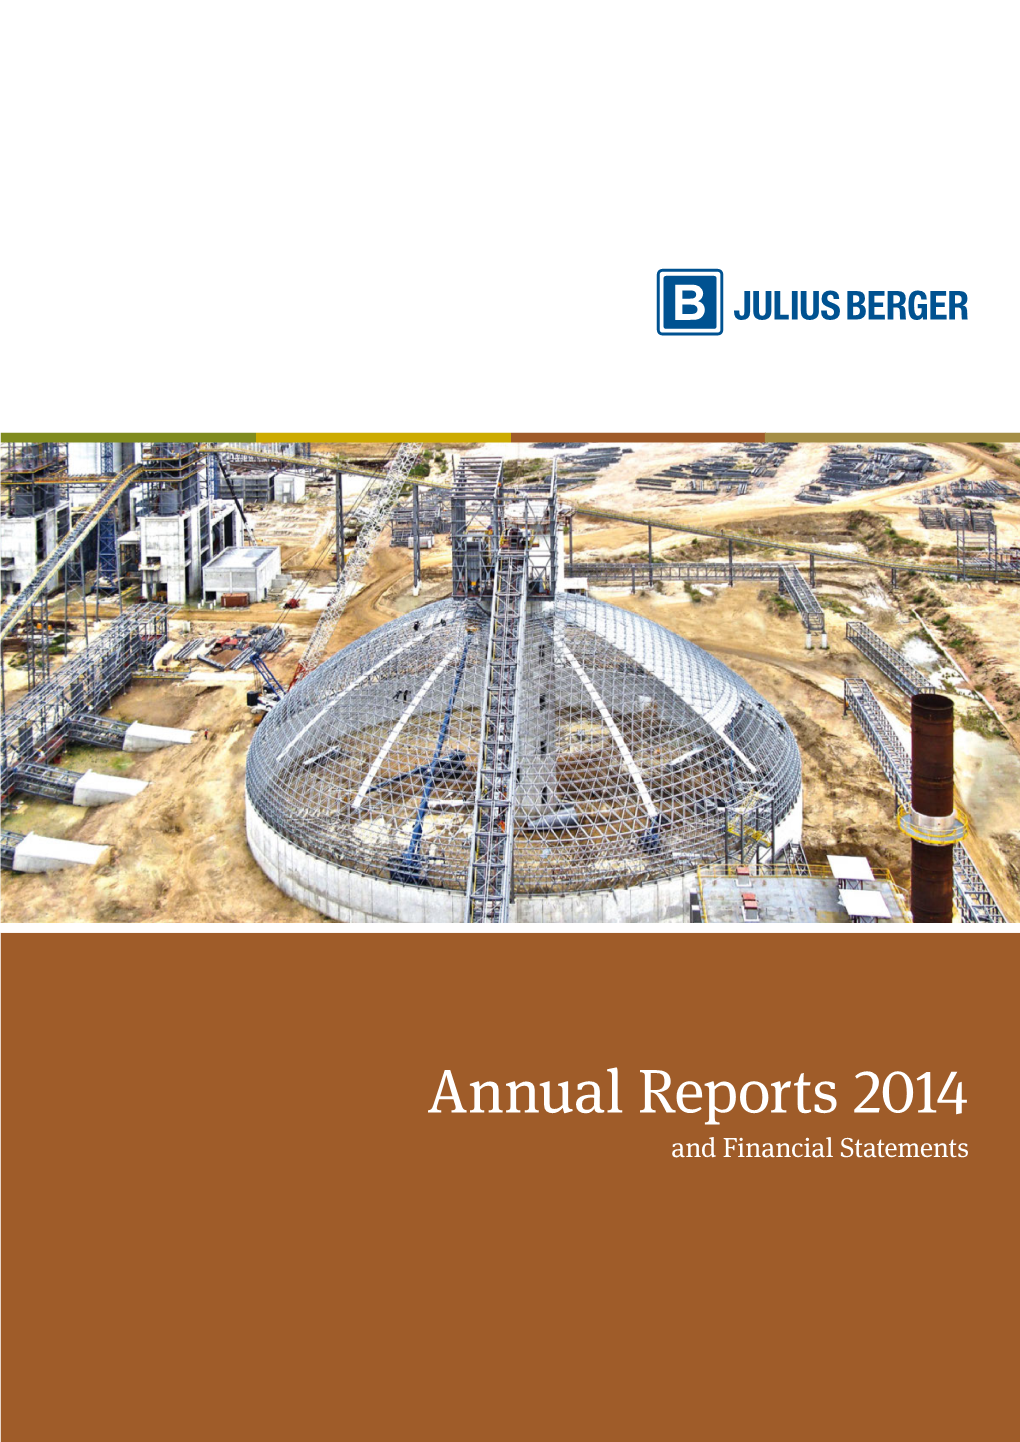 Annual Reports 2014 and Financial Statements